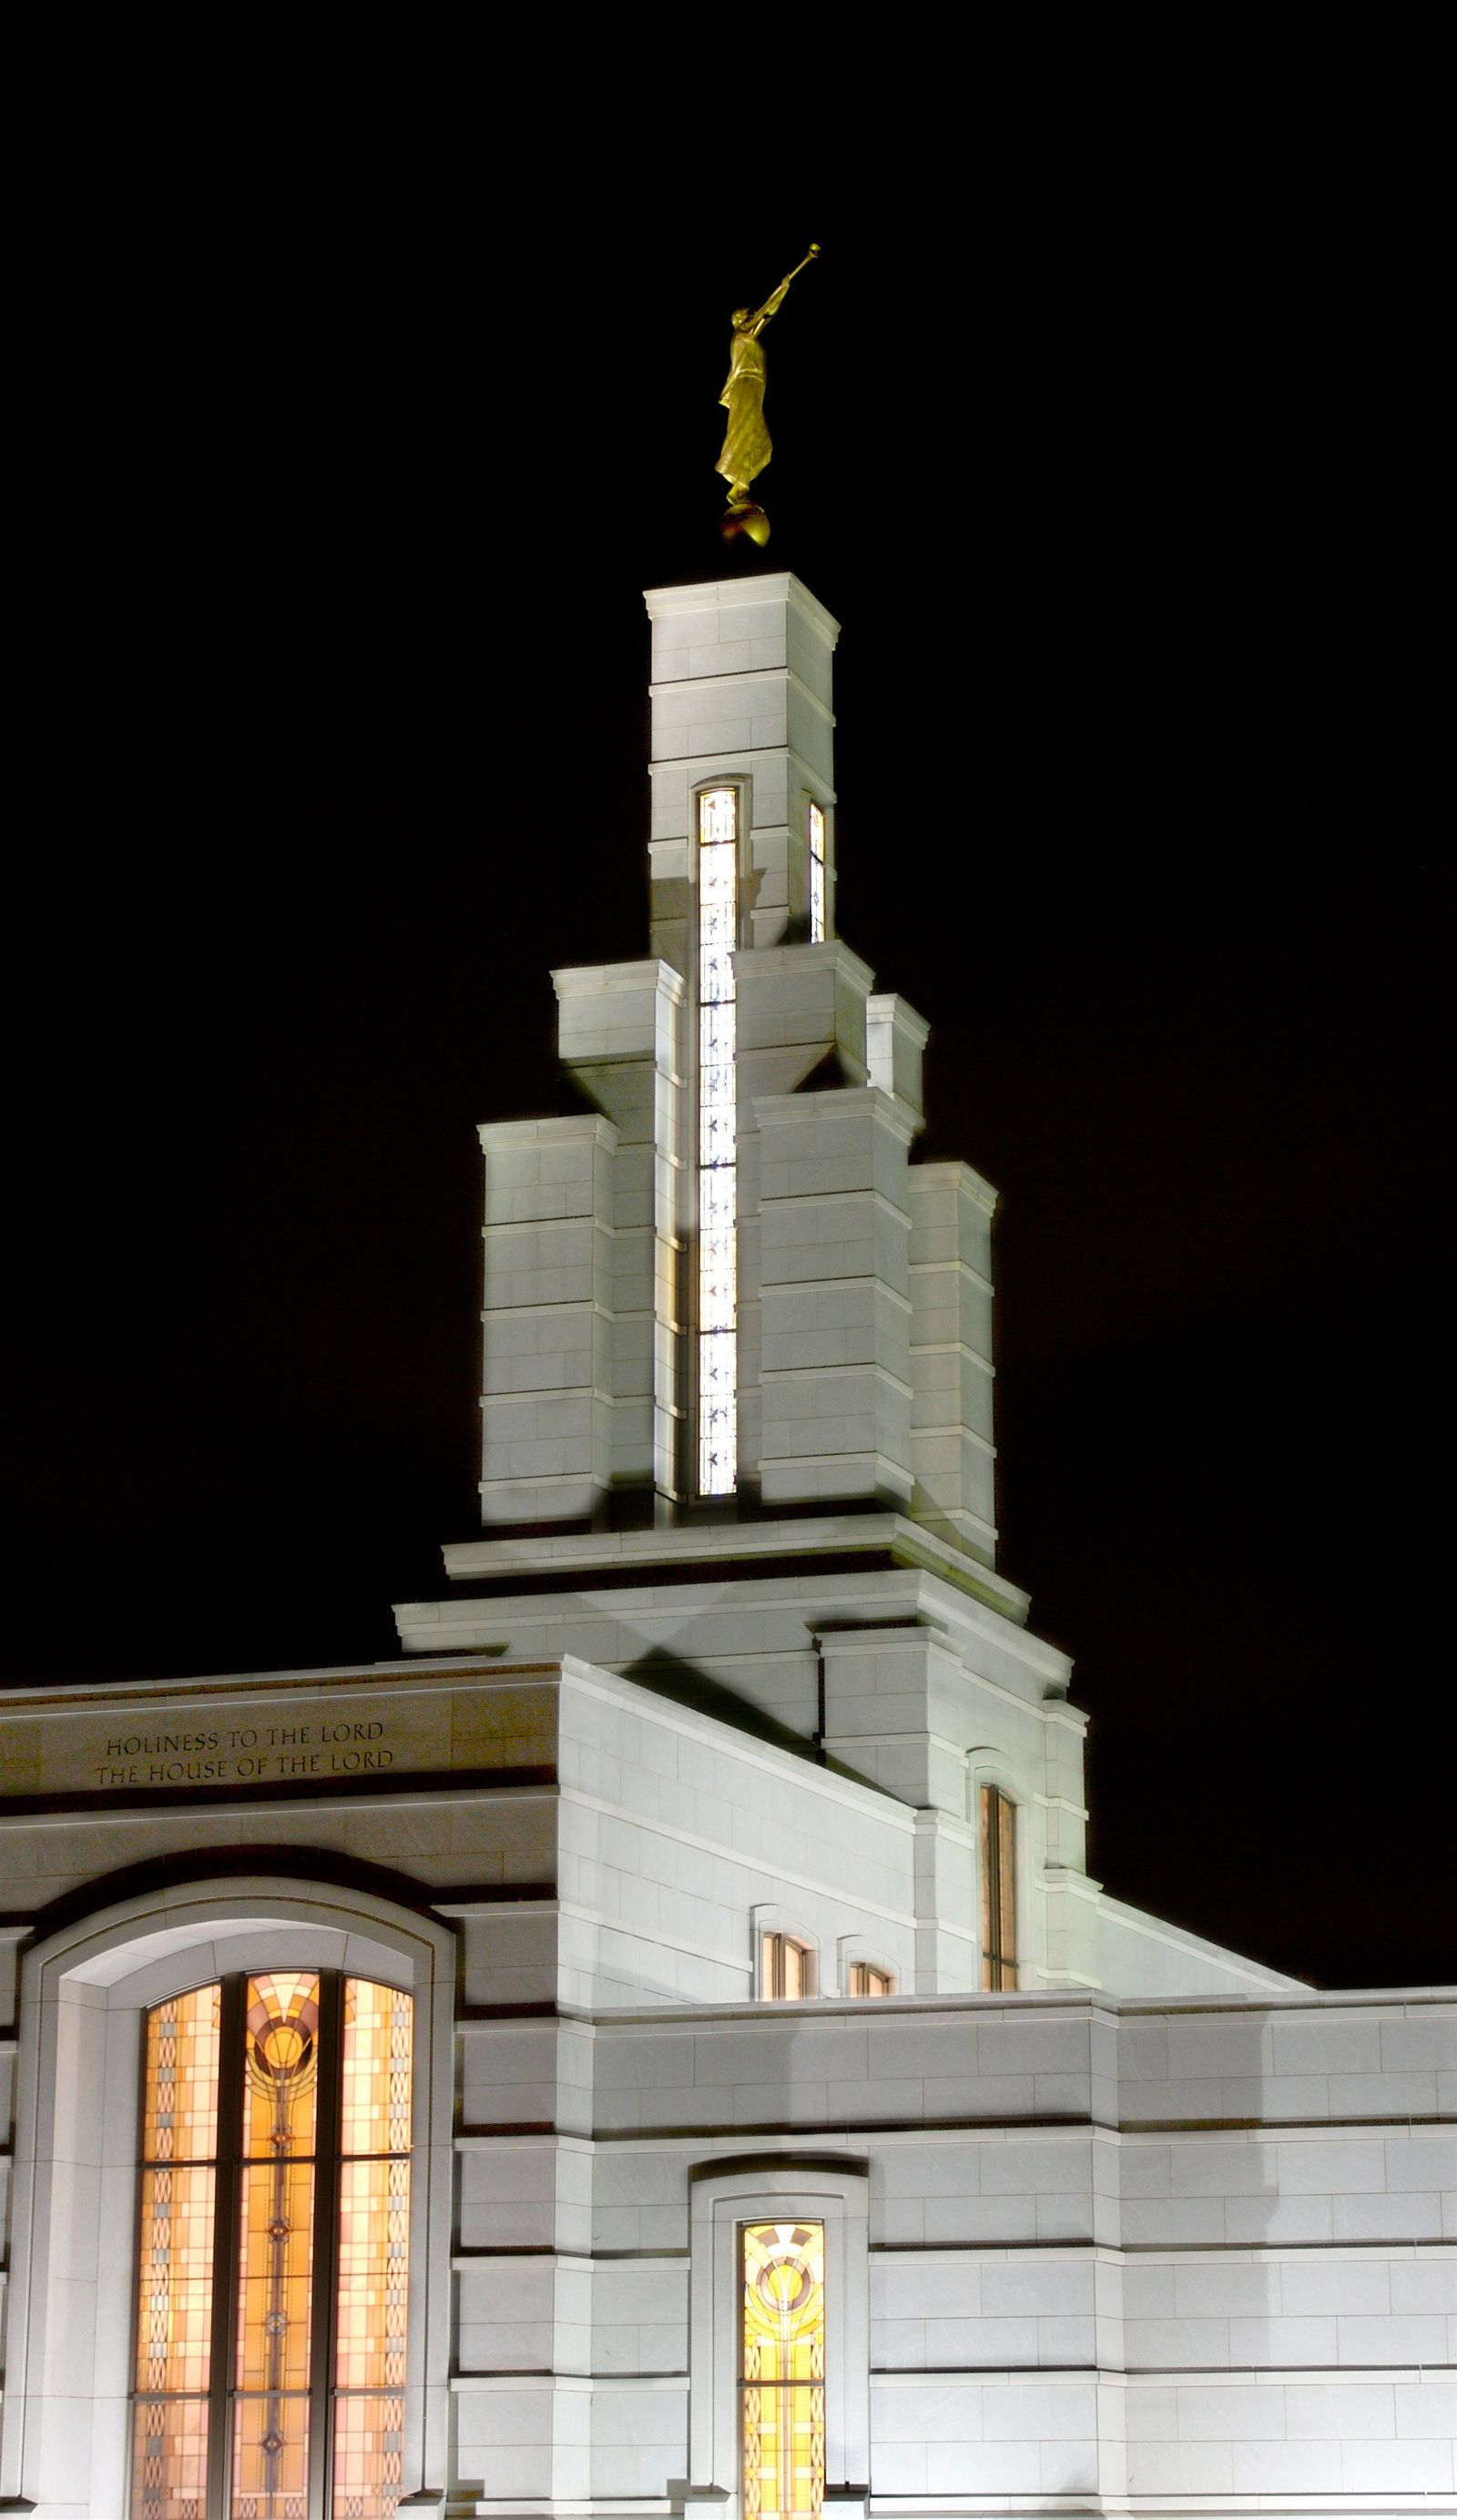 Lights shine on the Accra Ghana Temple at night.